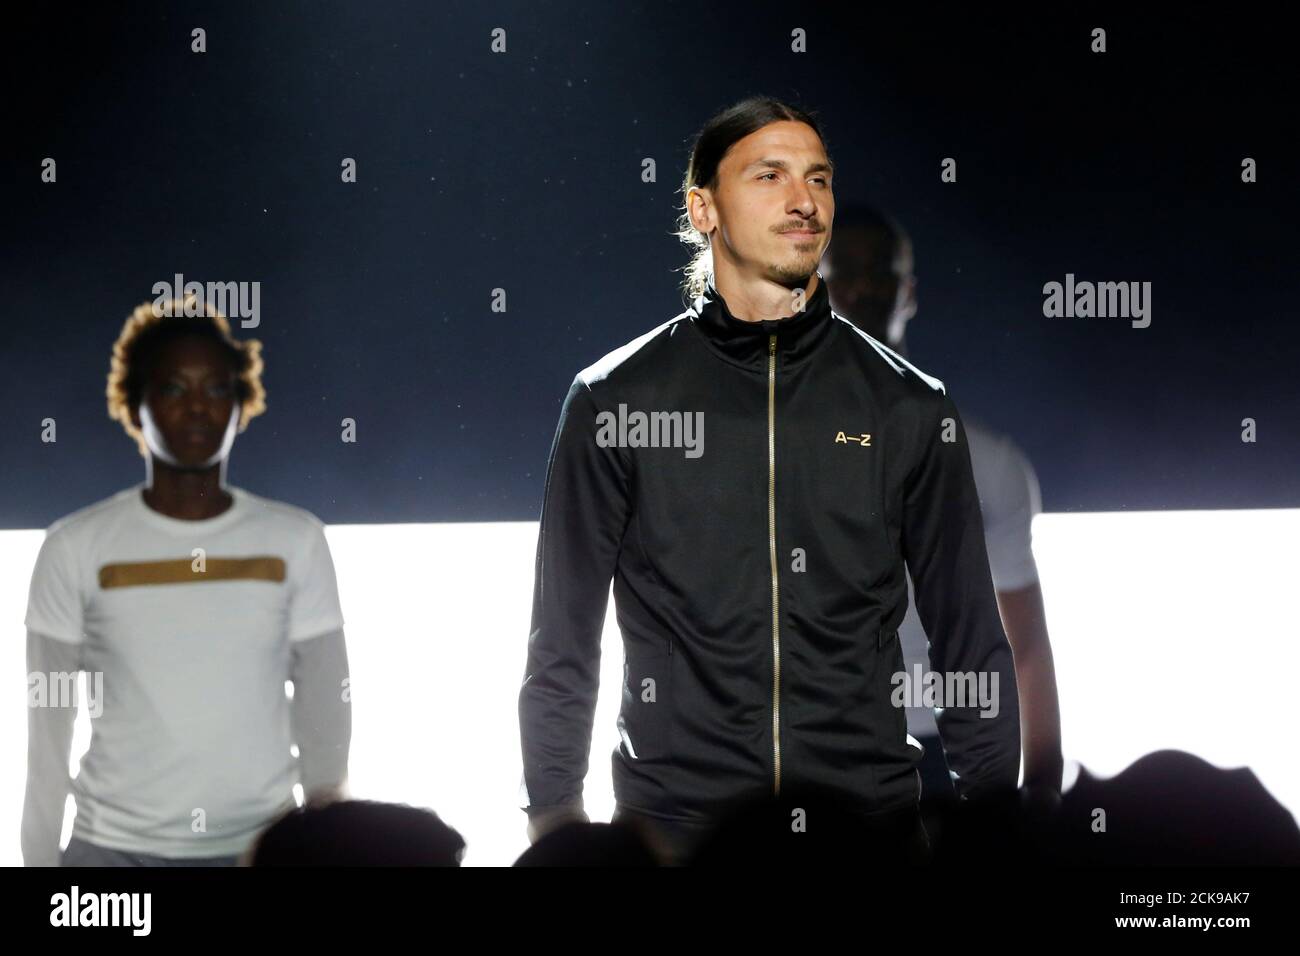 Soccer player Zlatan Ibrahimovic stands near models as he launches his A-Z  brand of sportswear in Paris, France, June 7, 2016. REUTERS/John Schults  Stock Photo - Alamy